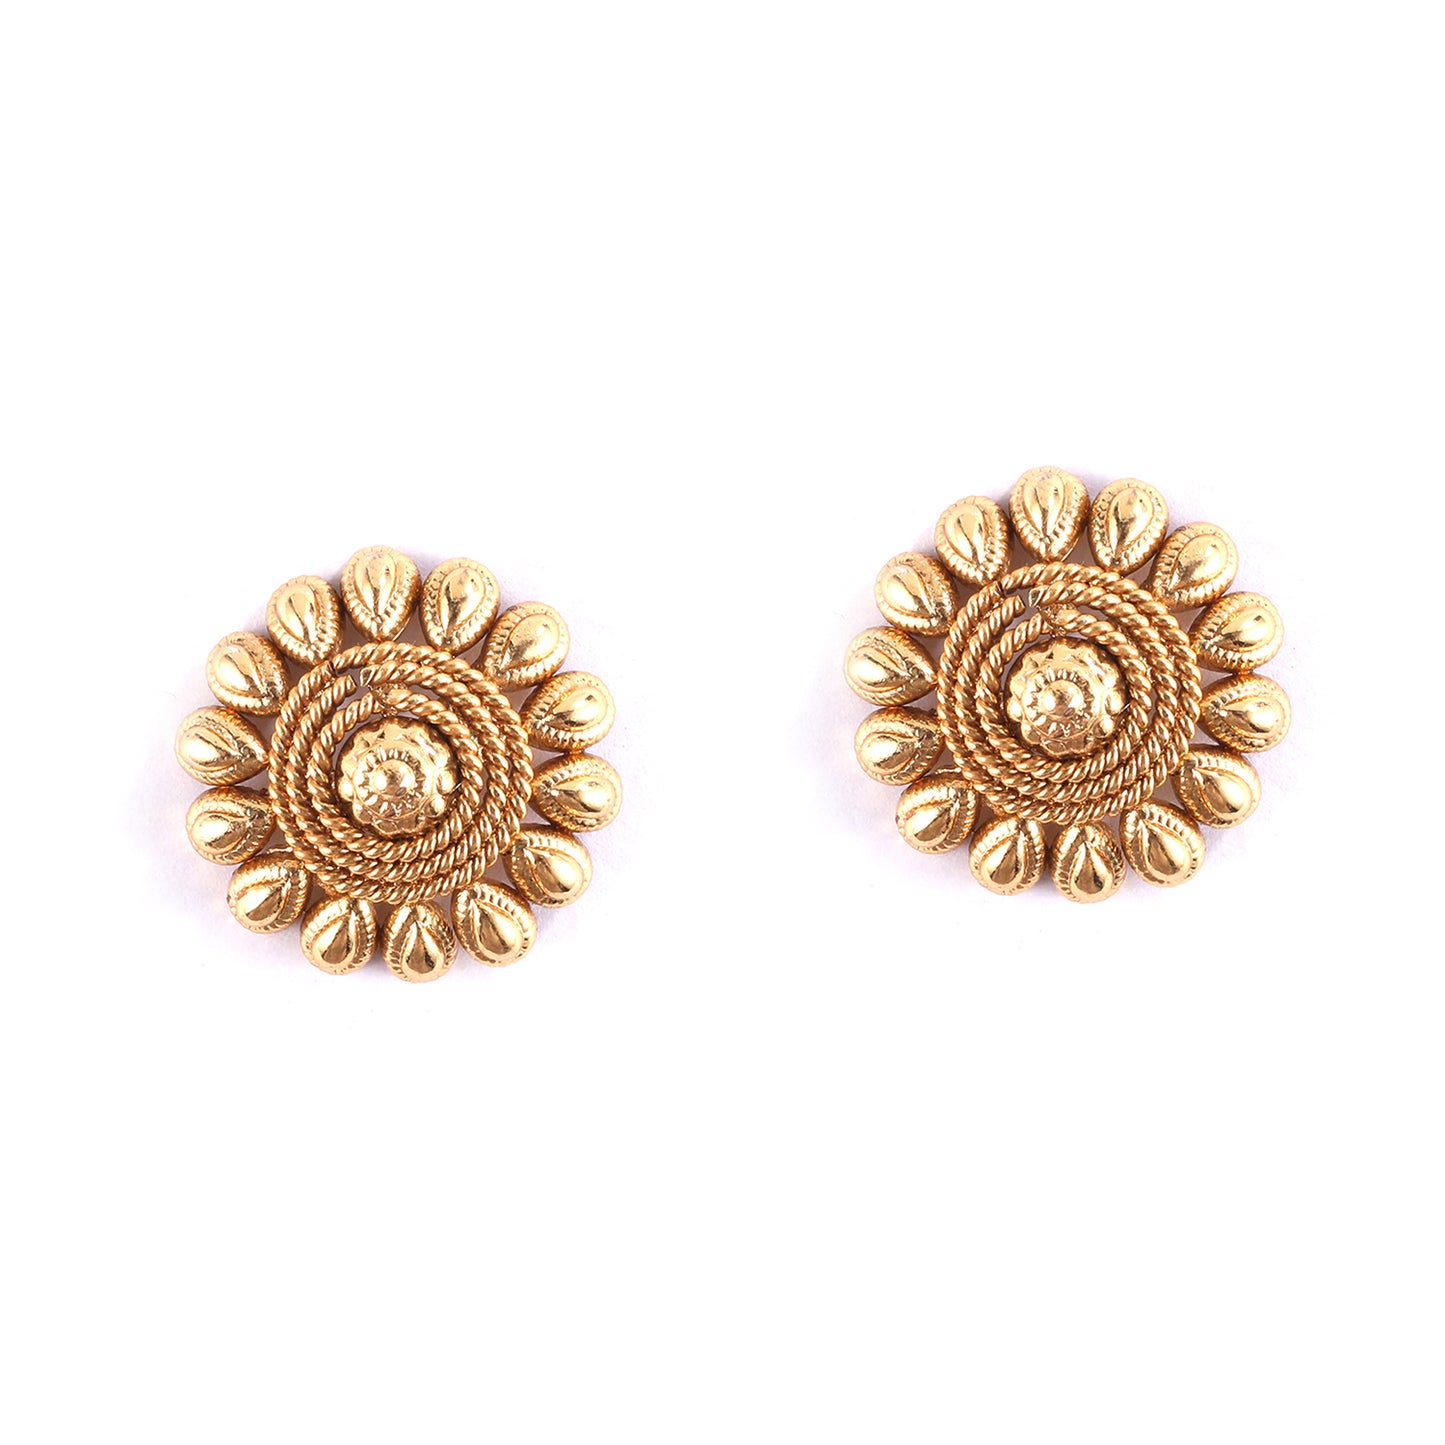 Vintage India Allure Set with Earrings